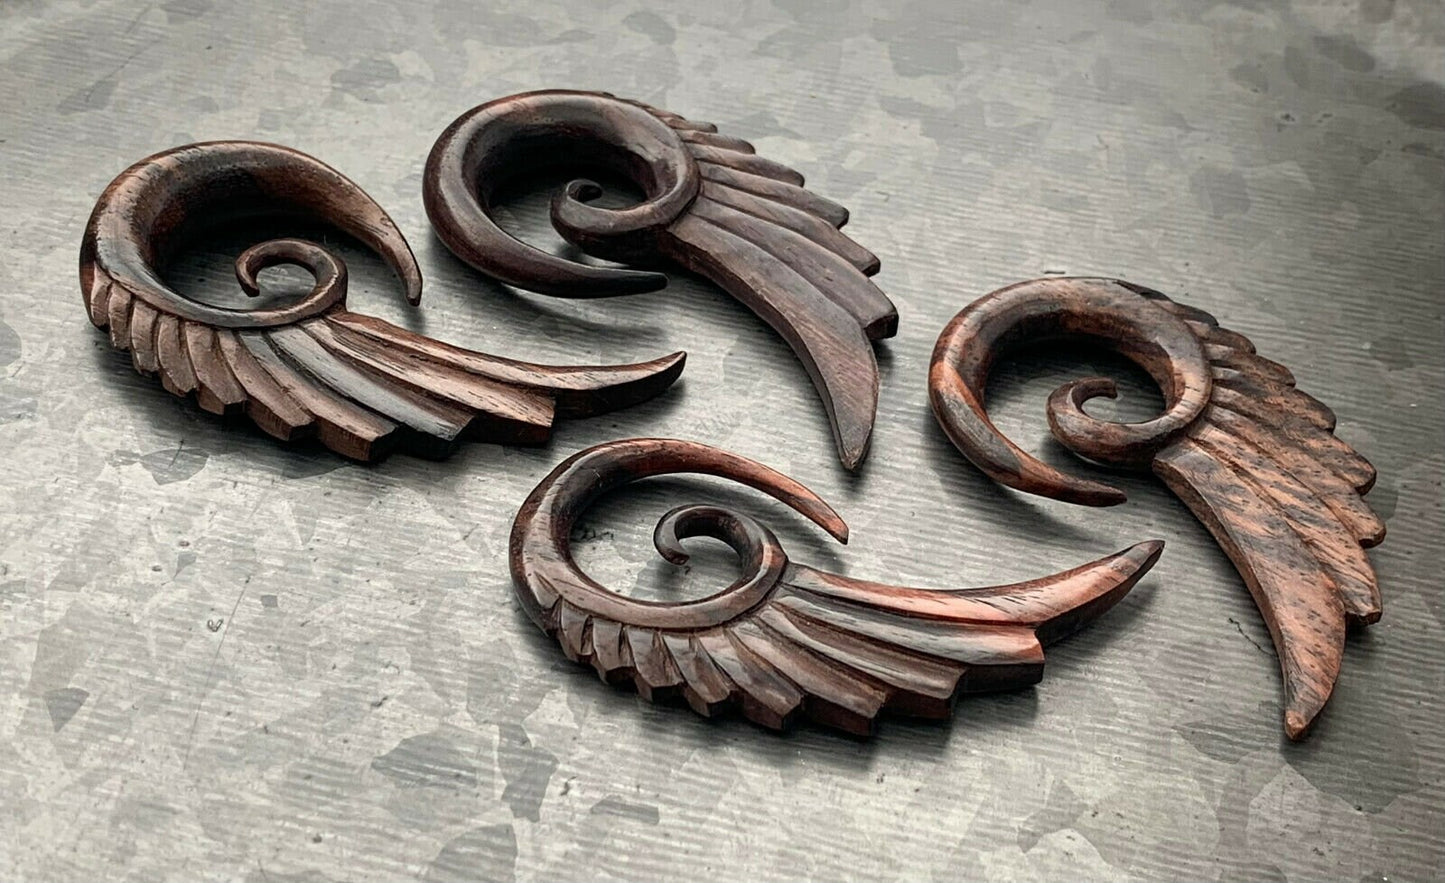 PAIR of Beautiful Hand Carved Organic Sono Wood Angel Wings Tapers/Plugs - Expanders - Gauges 4g (5mm) thru 00g (10mm) available!